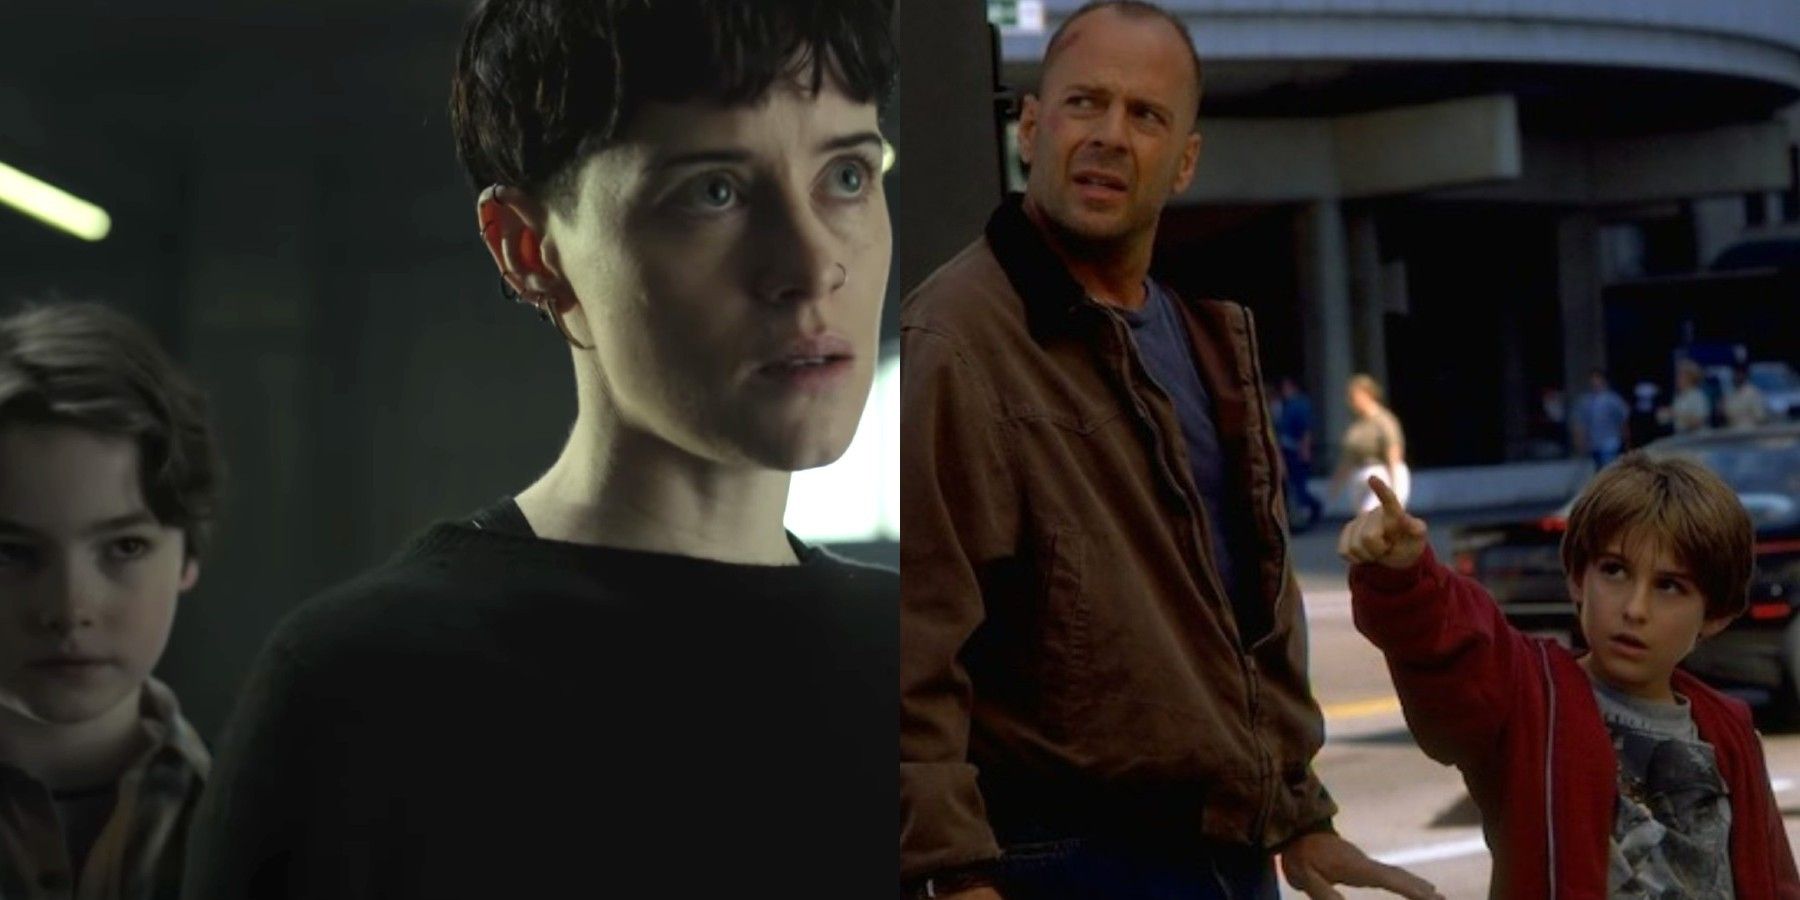 Christopher Convery and Claire Foy in The Girl In The Spider's Web; Bruce Willis and Miko Hughes in Mercury Rising